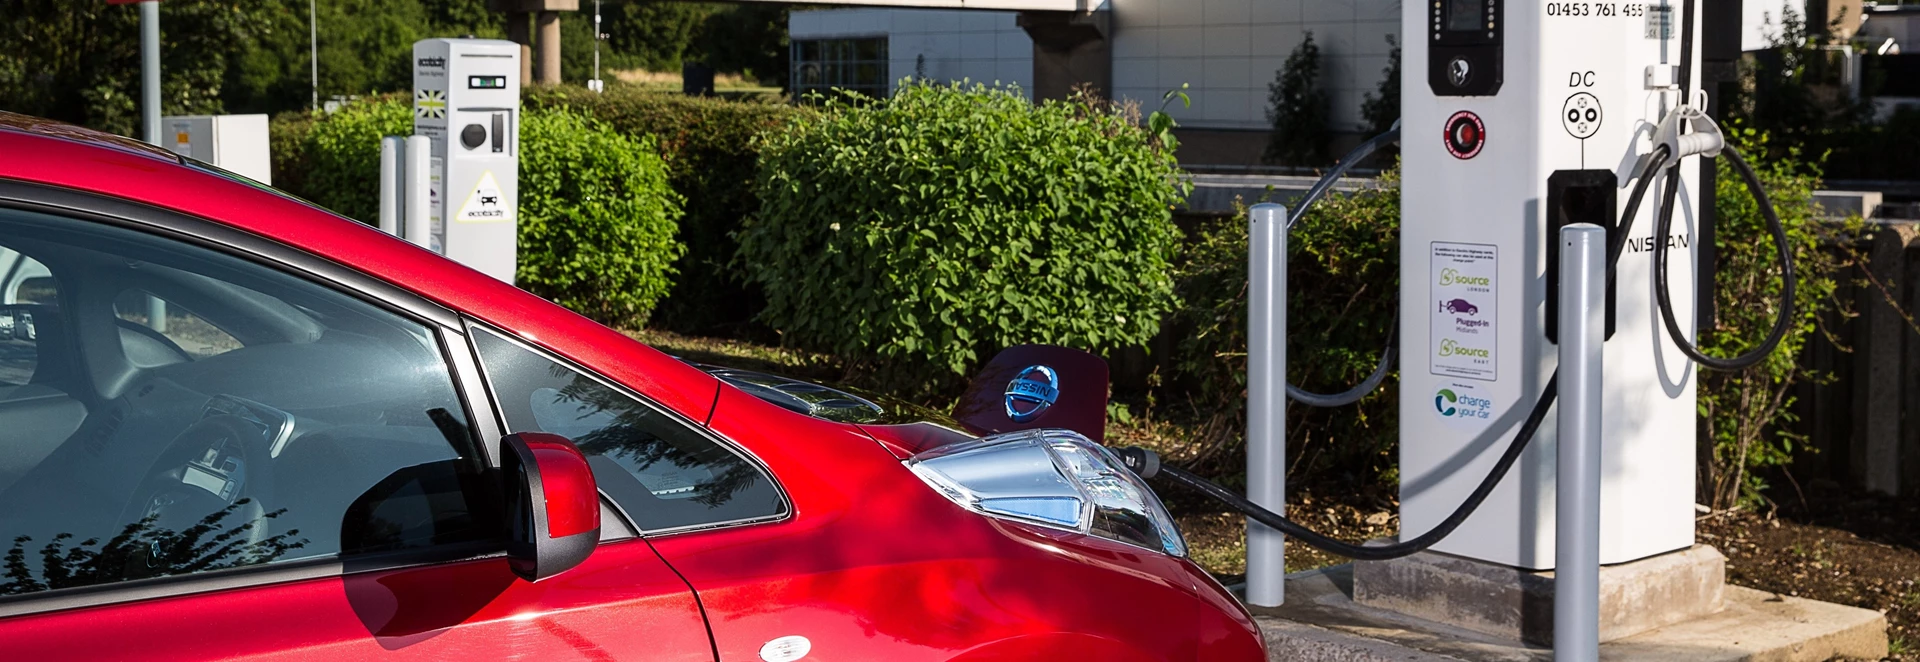 Ecotricity to charge £5 per 20 minutes 